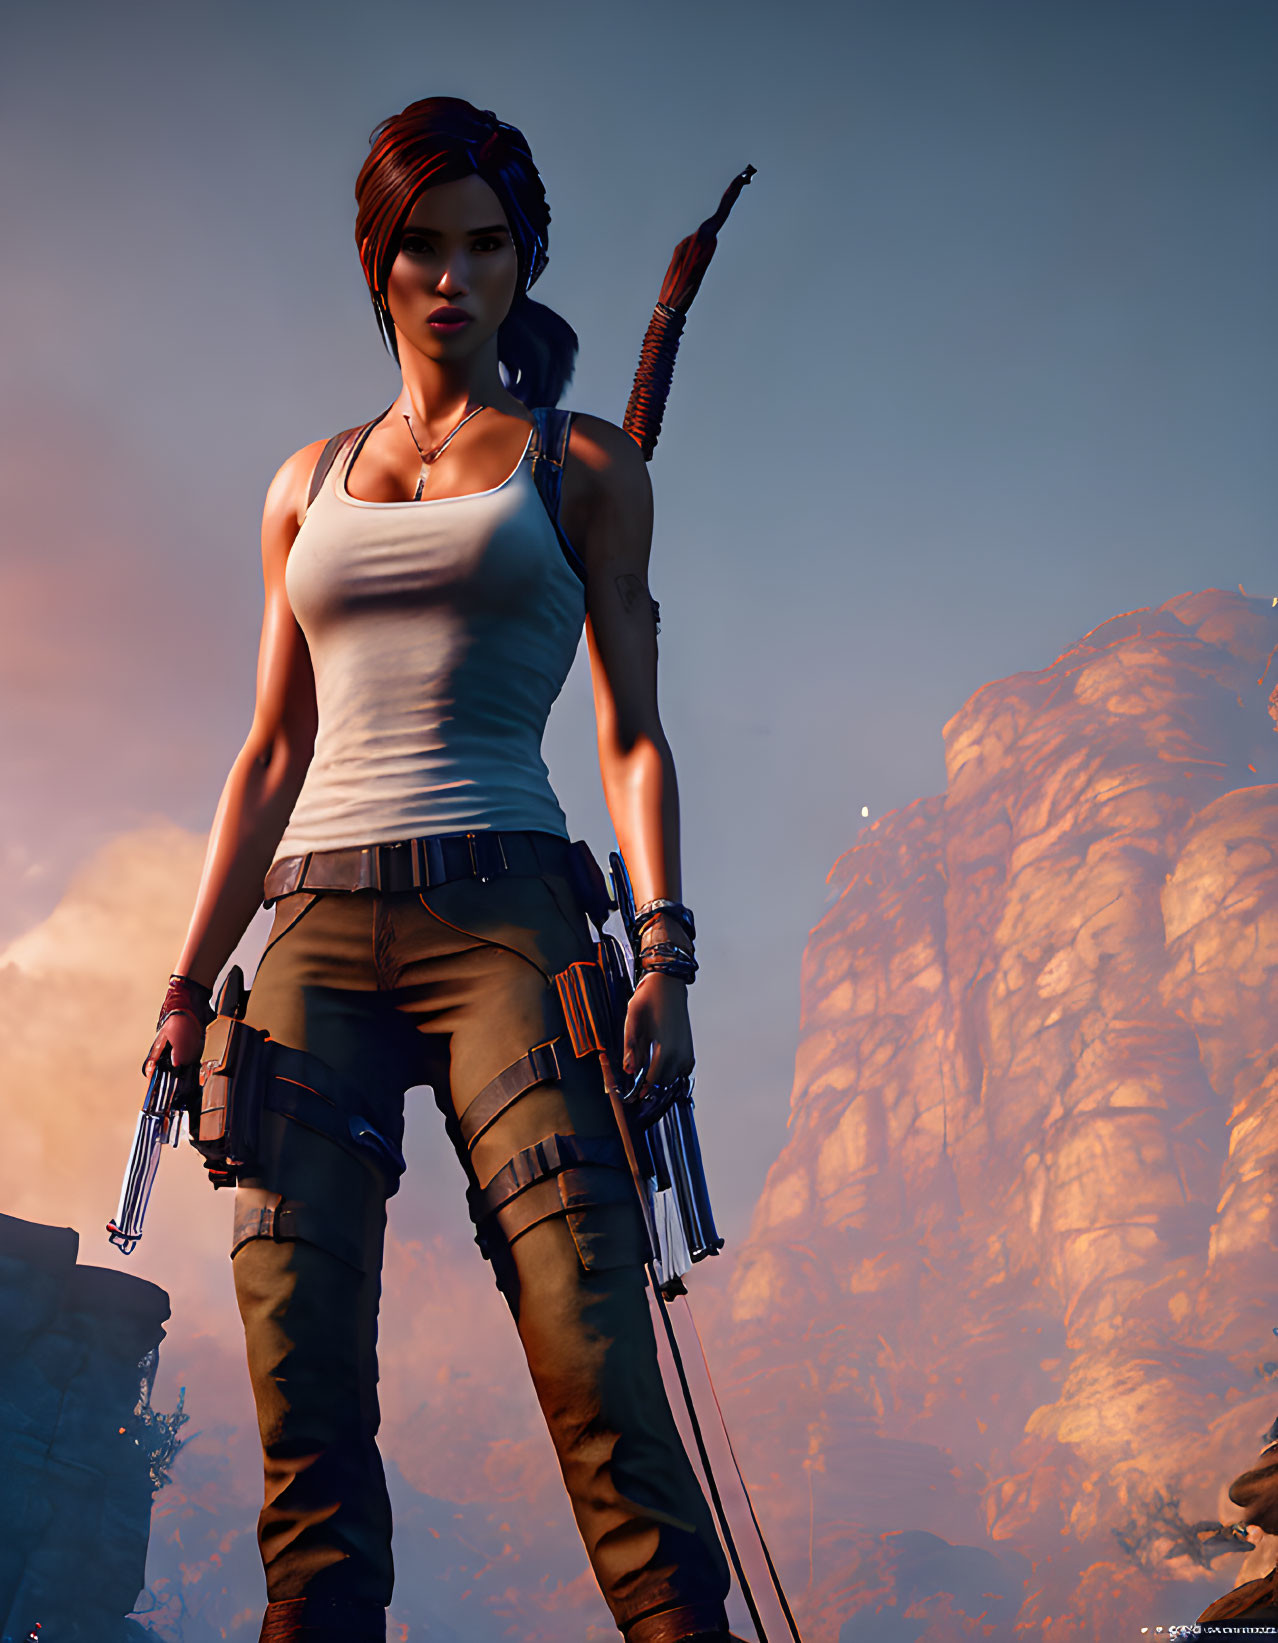 Female character with red hair in tank top and cargo pants, armed, against rocky sunset.